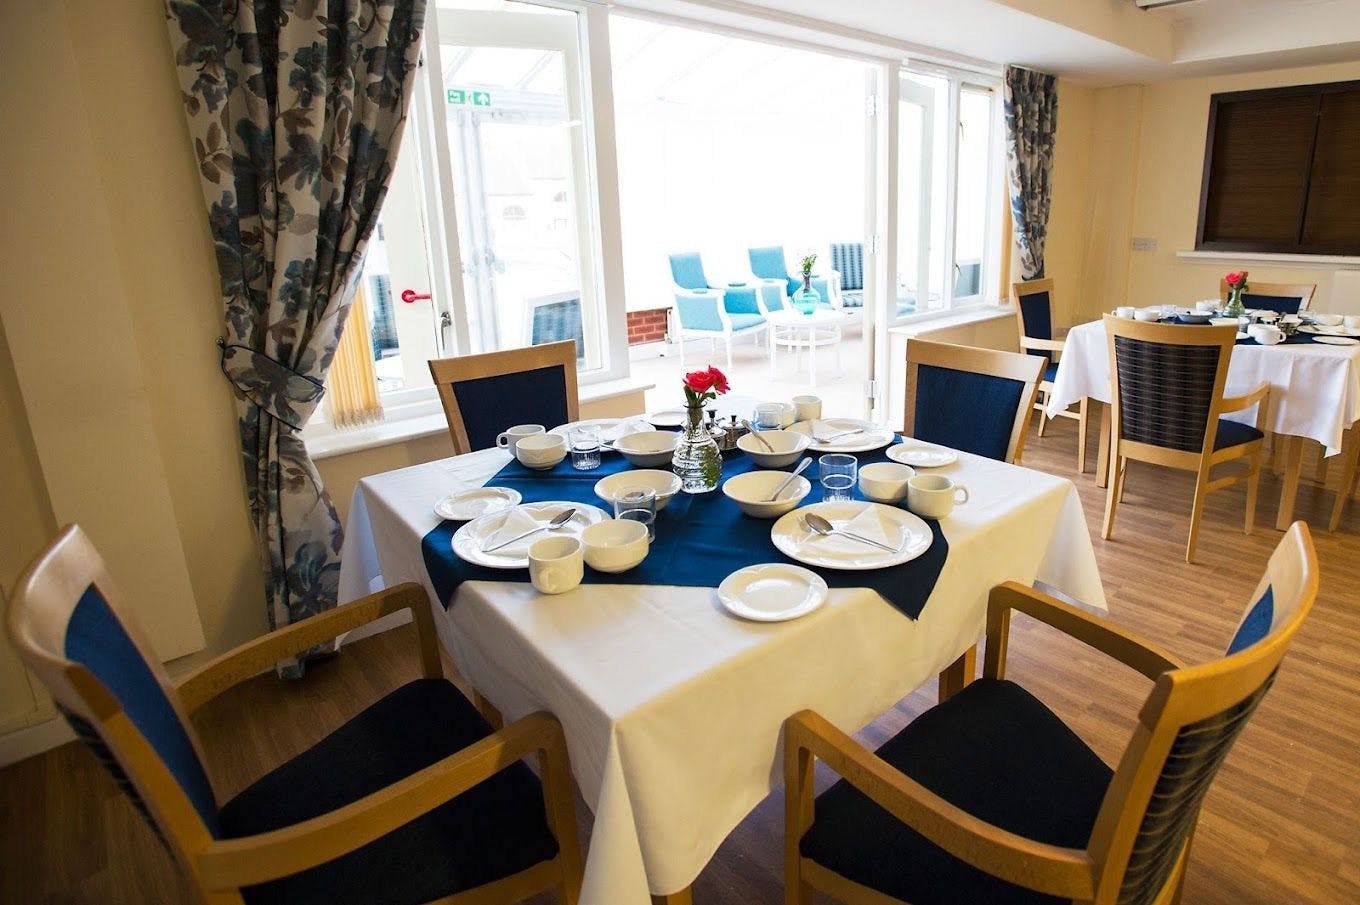 Dining Room at Asra house care home Leicester, Leicestershire